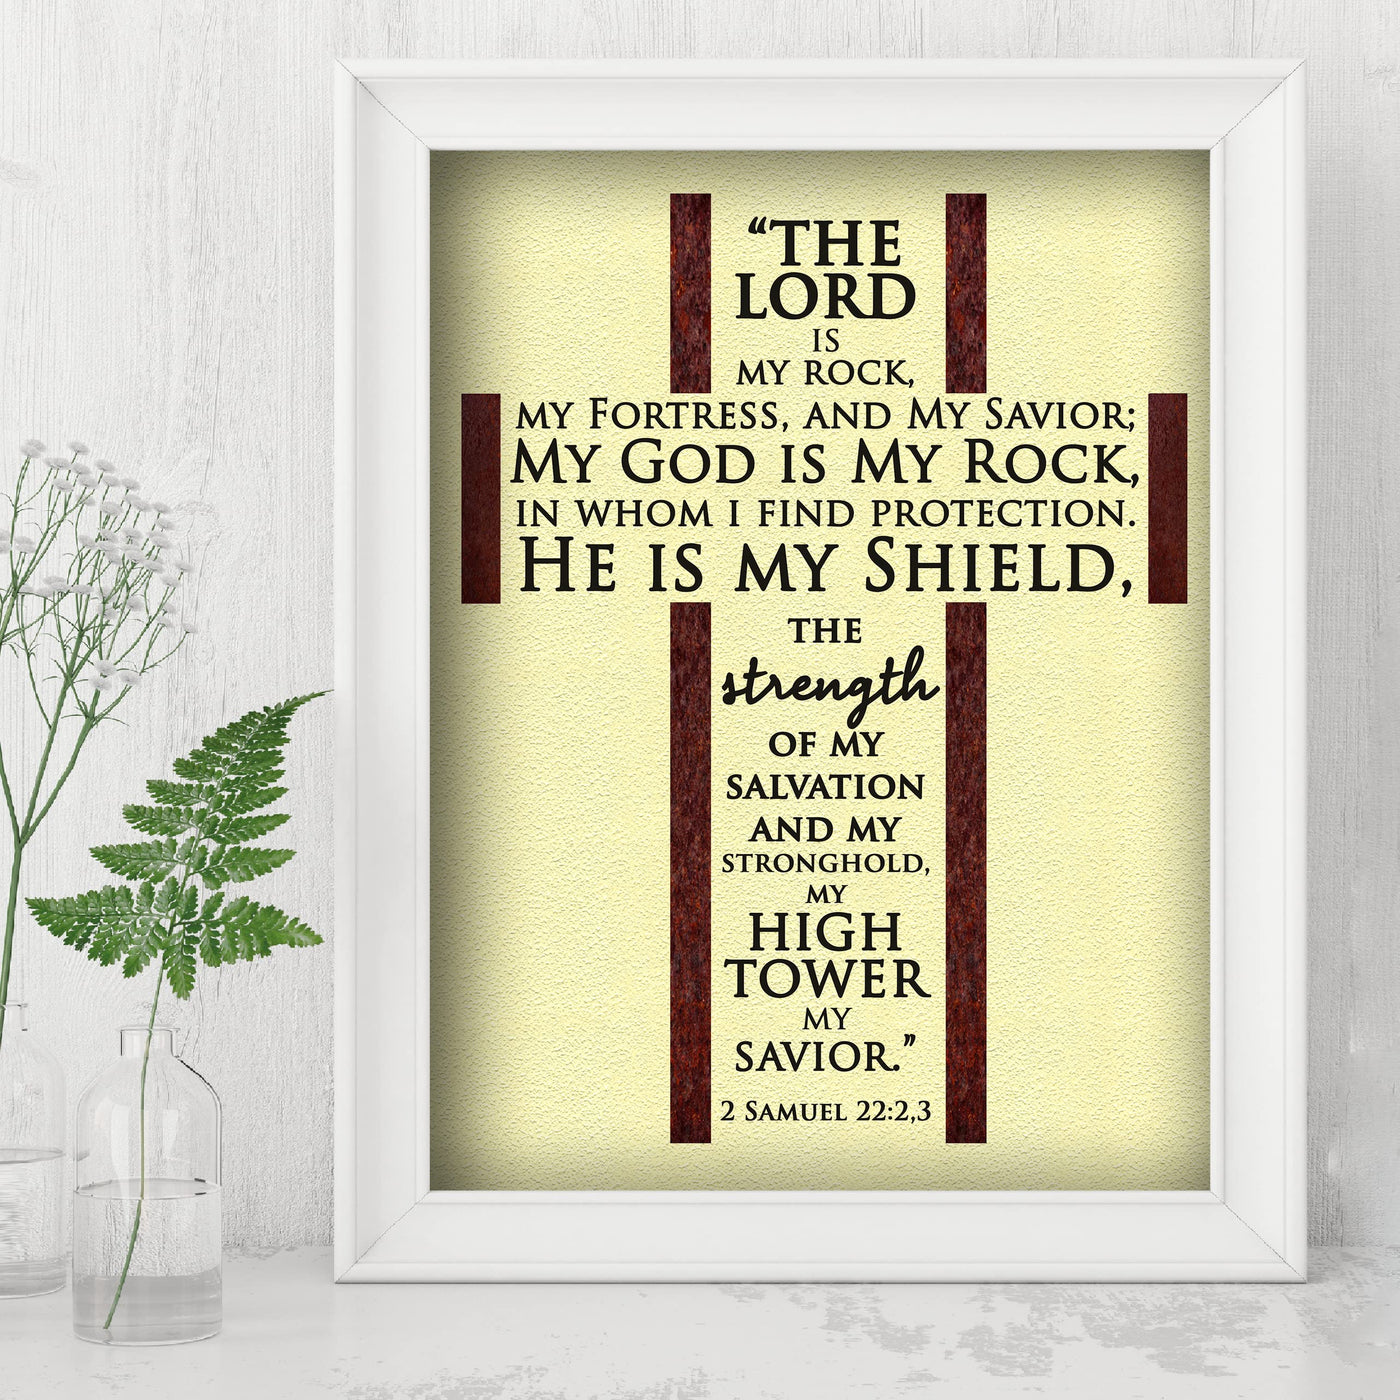 The Lord Is My Rock, My Savior-Bible Verse Wall Art -8 x 10" Rugged Cross Word Art -Scripture Wall Print-Ready to Frame. Home-Office-Church-Religious Decor. 2 Samuel 22:2-3. Perfect Christian Gift!